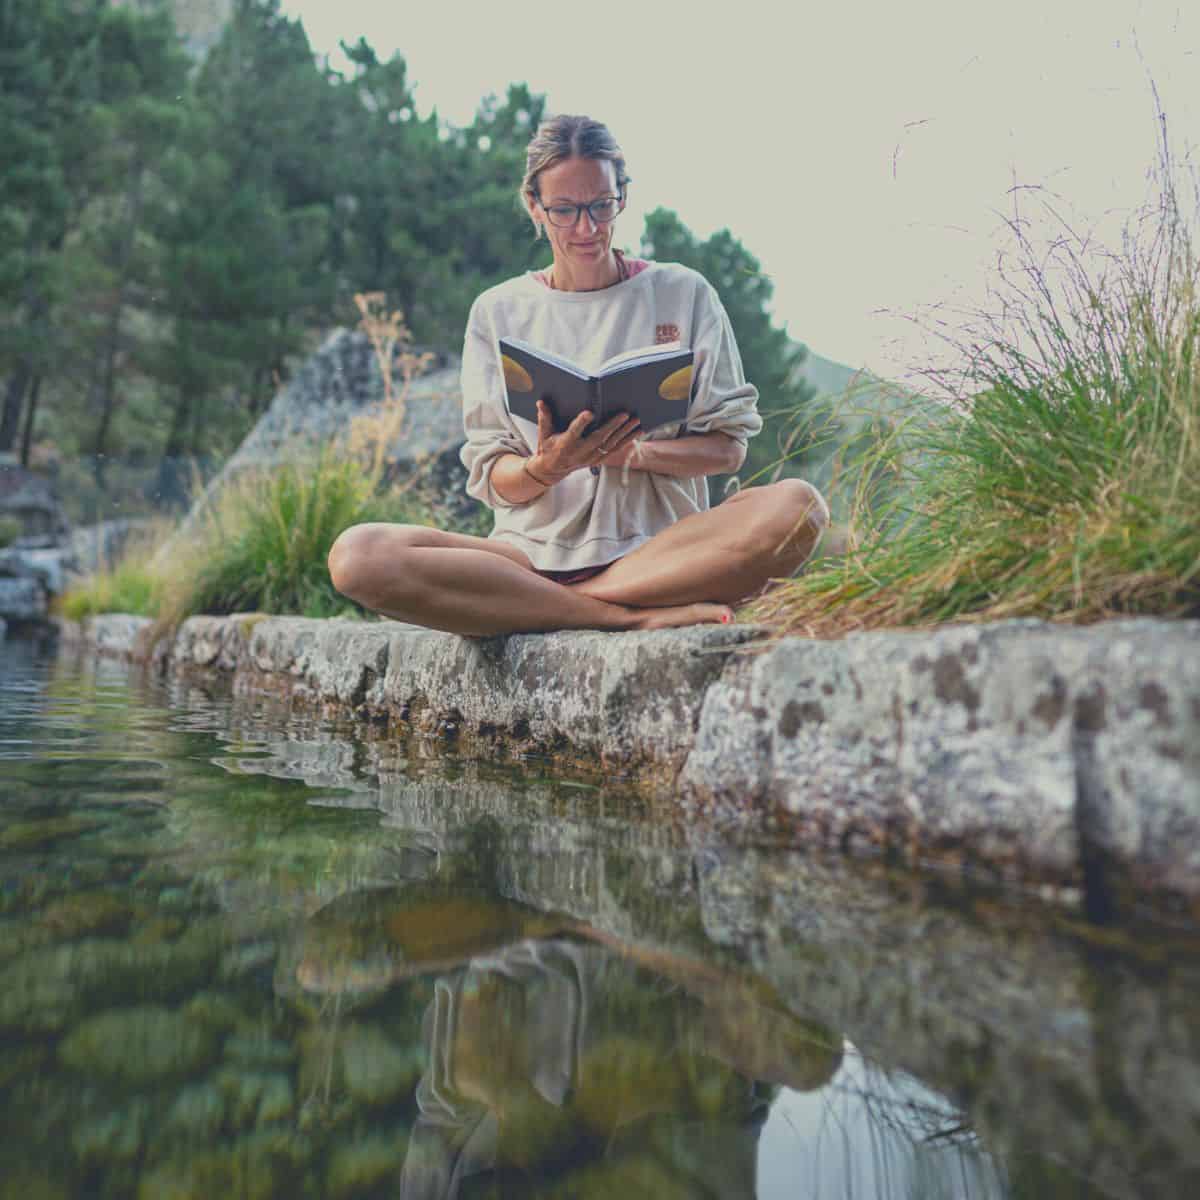 A woman who is trying to get comfortable being uncomfortable by reading poetry next to a river bank and saying it out loud.